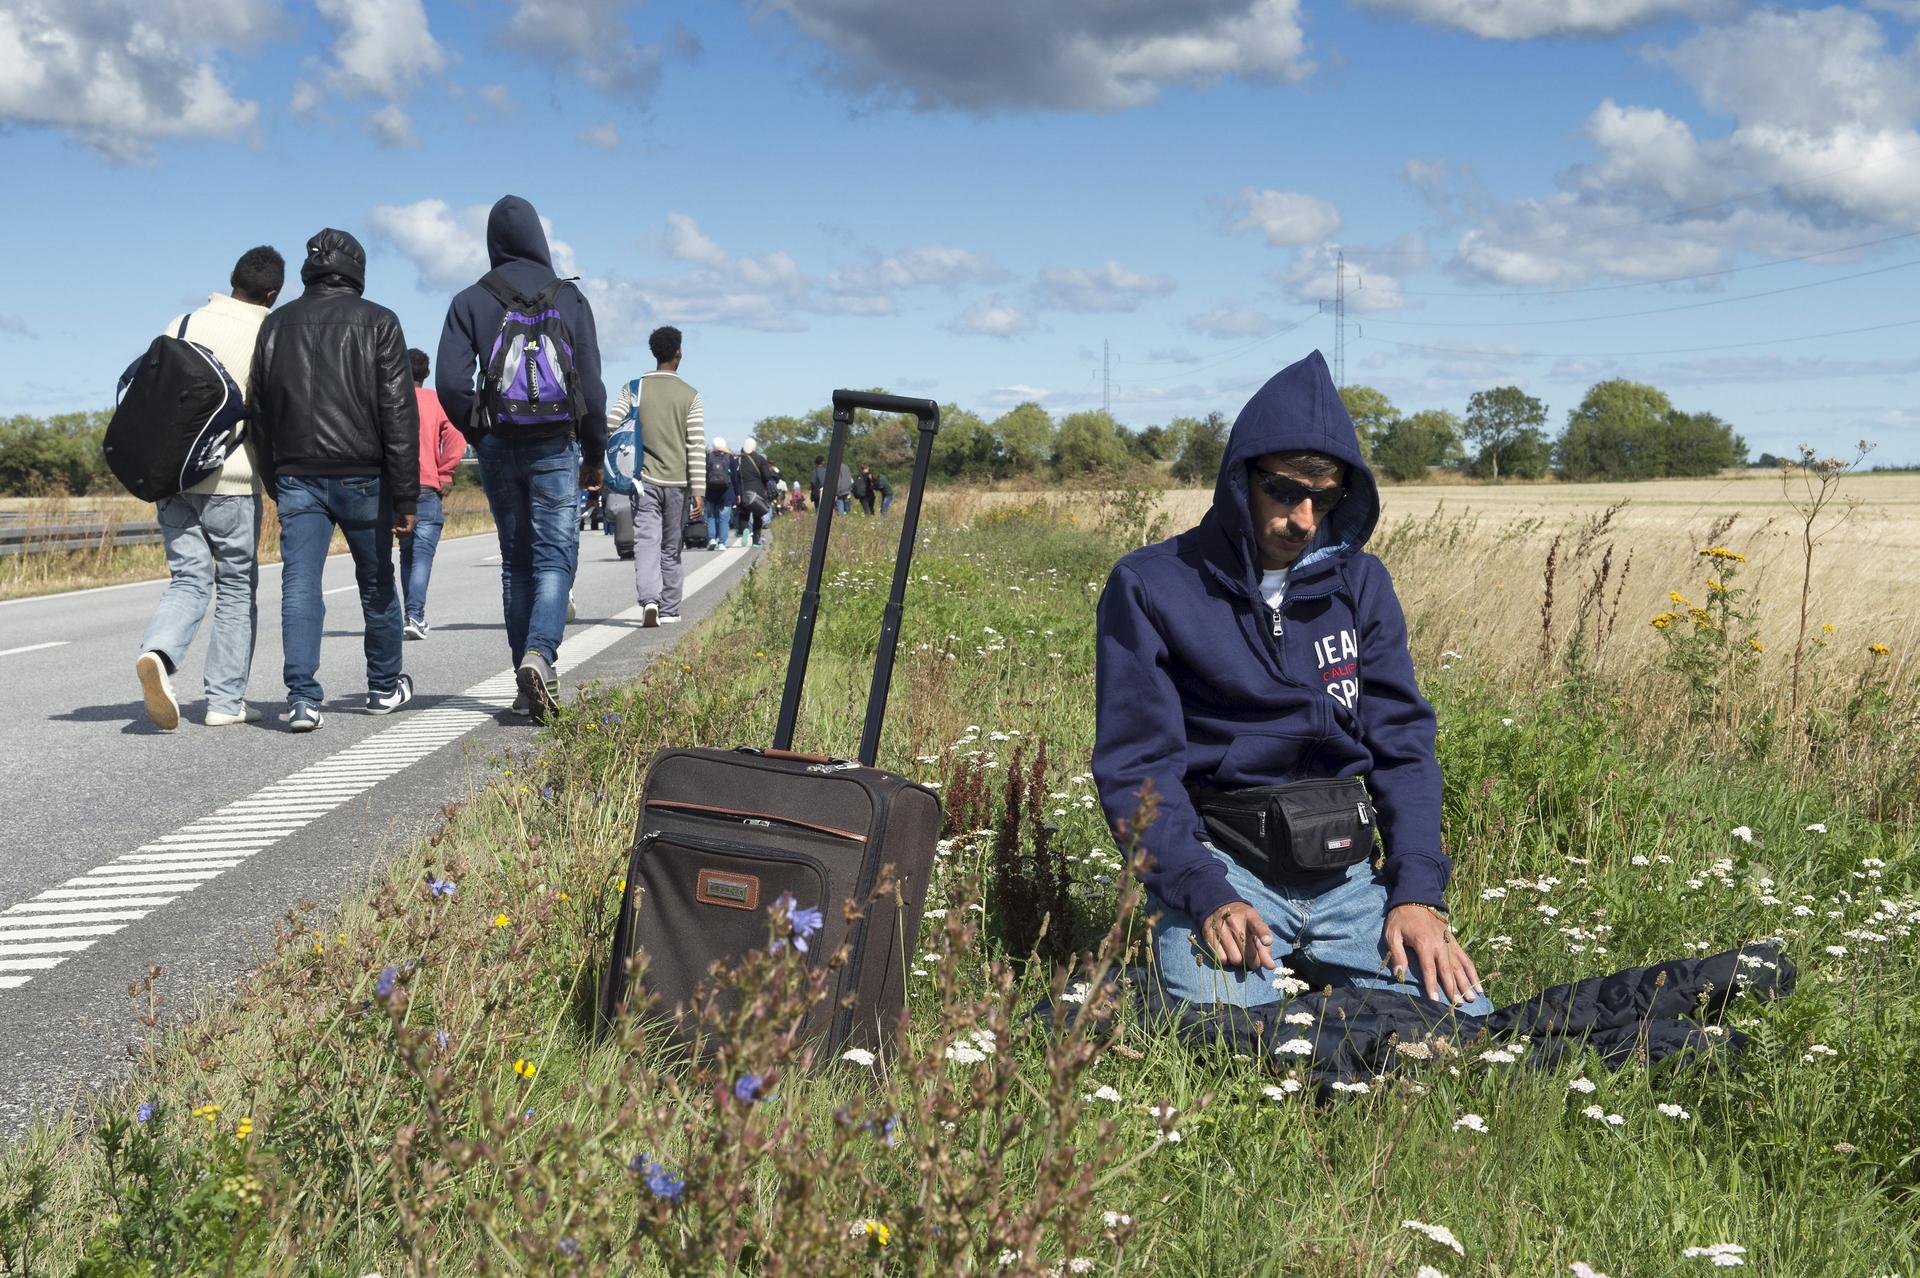 A migrant prays beside a freeway north of Rodby as a large group of migrants, mainly from Syria, walk on the highway towards the north September 7, 2015. Many migrants, mainly from Syria and Iraq, have arrived in Denmark over the last few days.